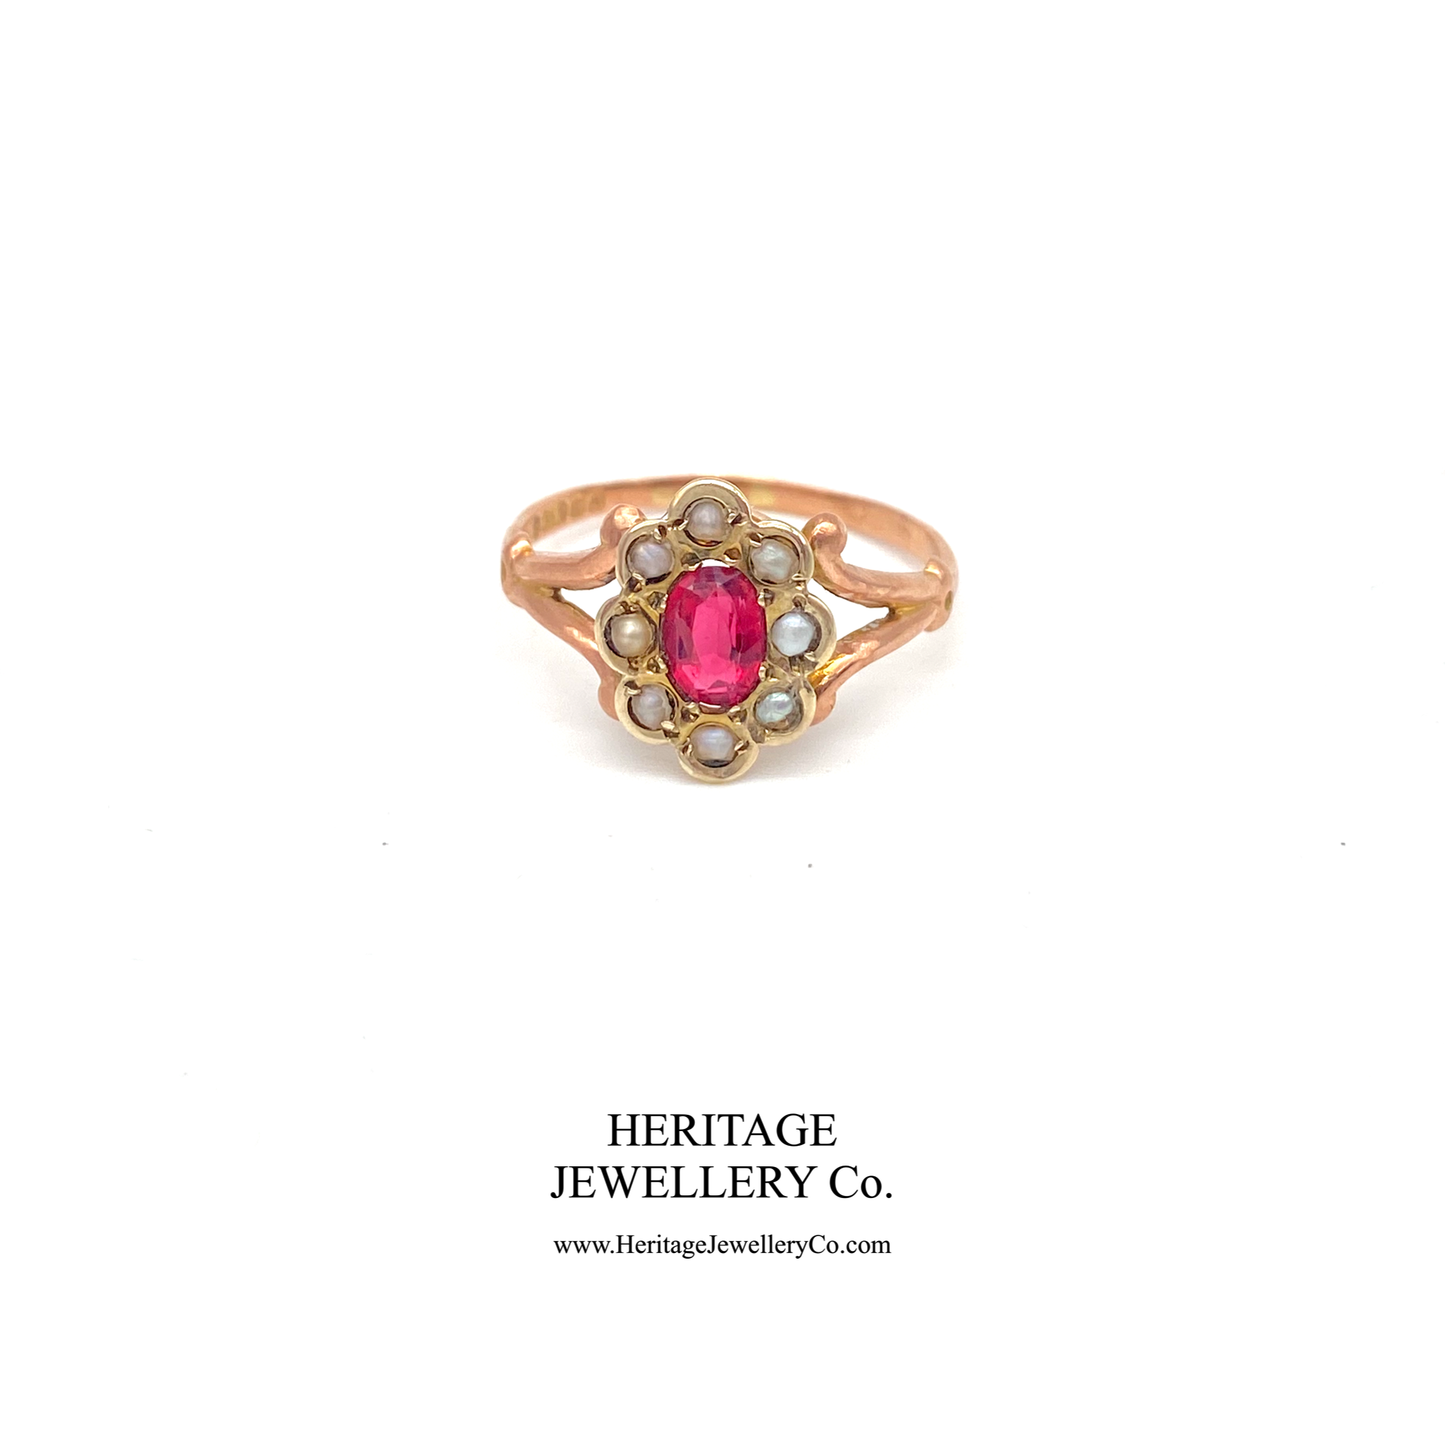 Antique Tourmaline and Seed Pearl Ring (c. 1919)